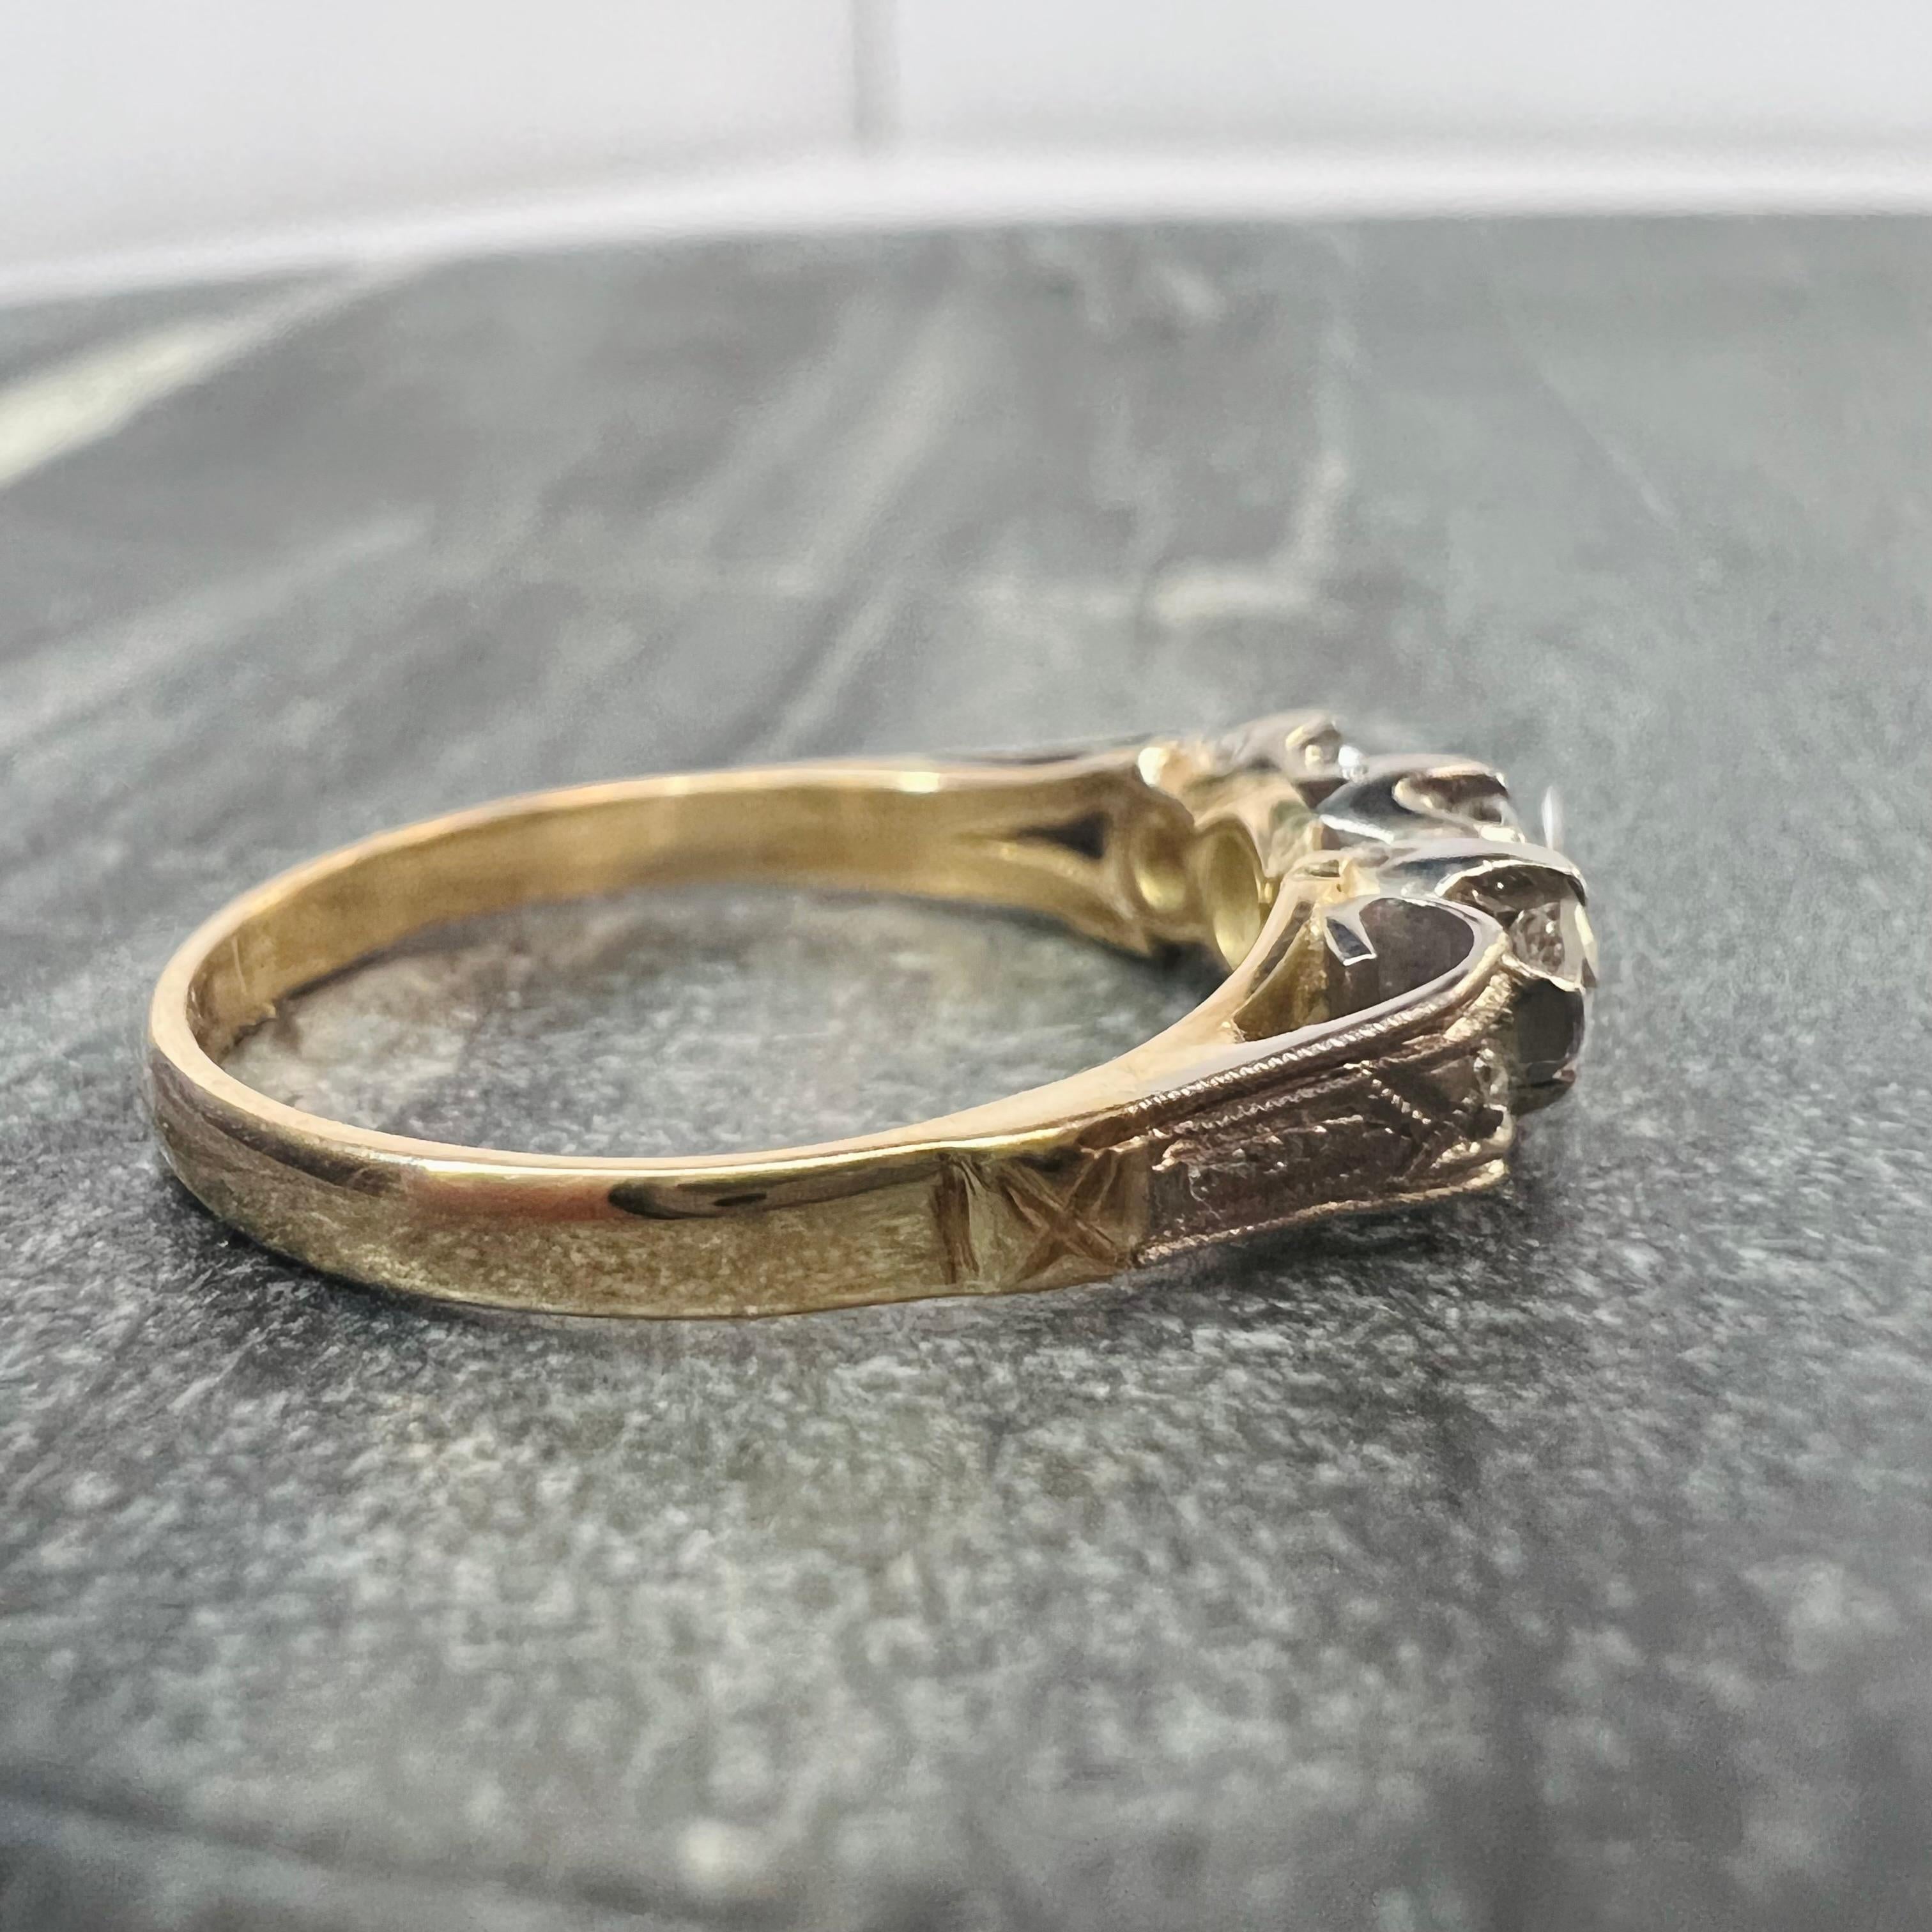 Vintage Edwardian Platinum and 18K Yellow Gold Engraved Diamond Ring In Excellent Condition For Sale In Addison, TX